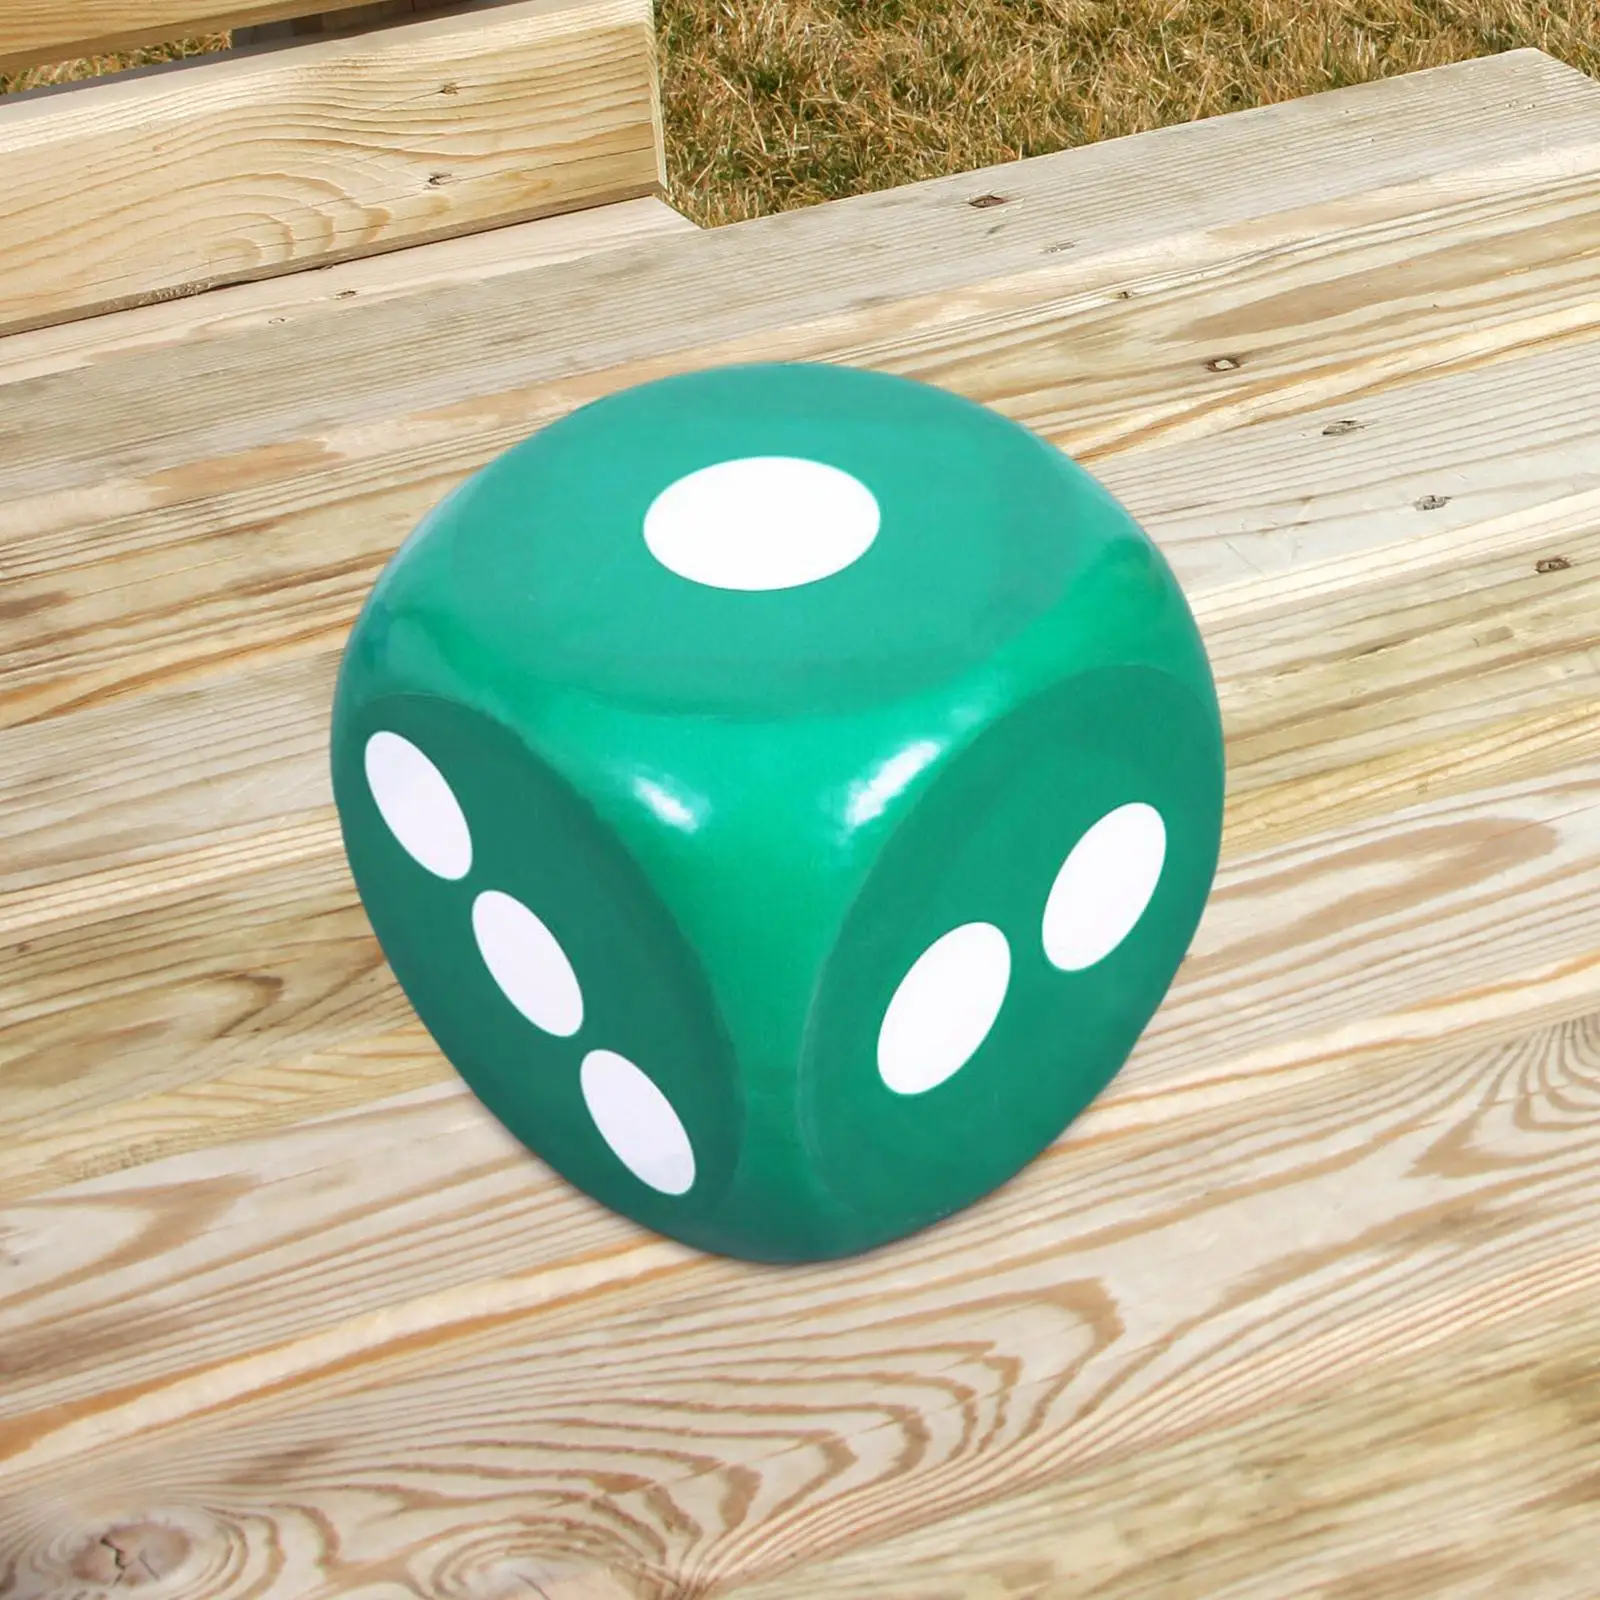 Foam Dice with Number Dots Early Learning Toys 5.9 inch Large Dice Cubes Big